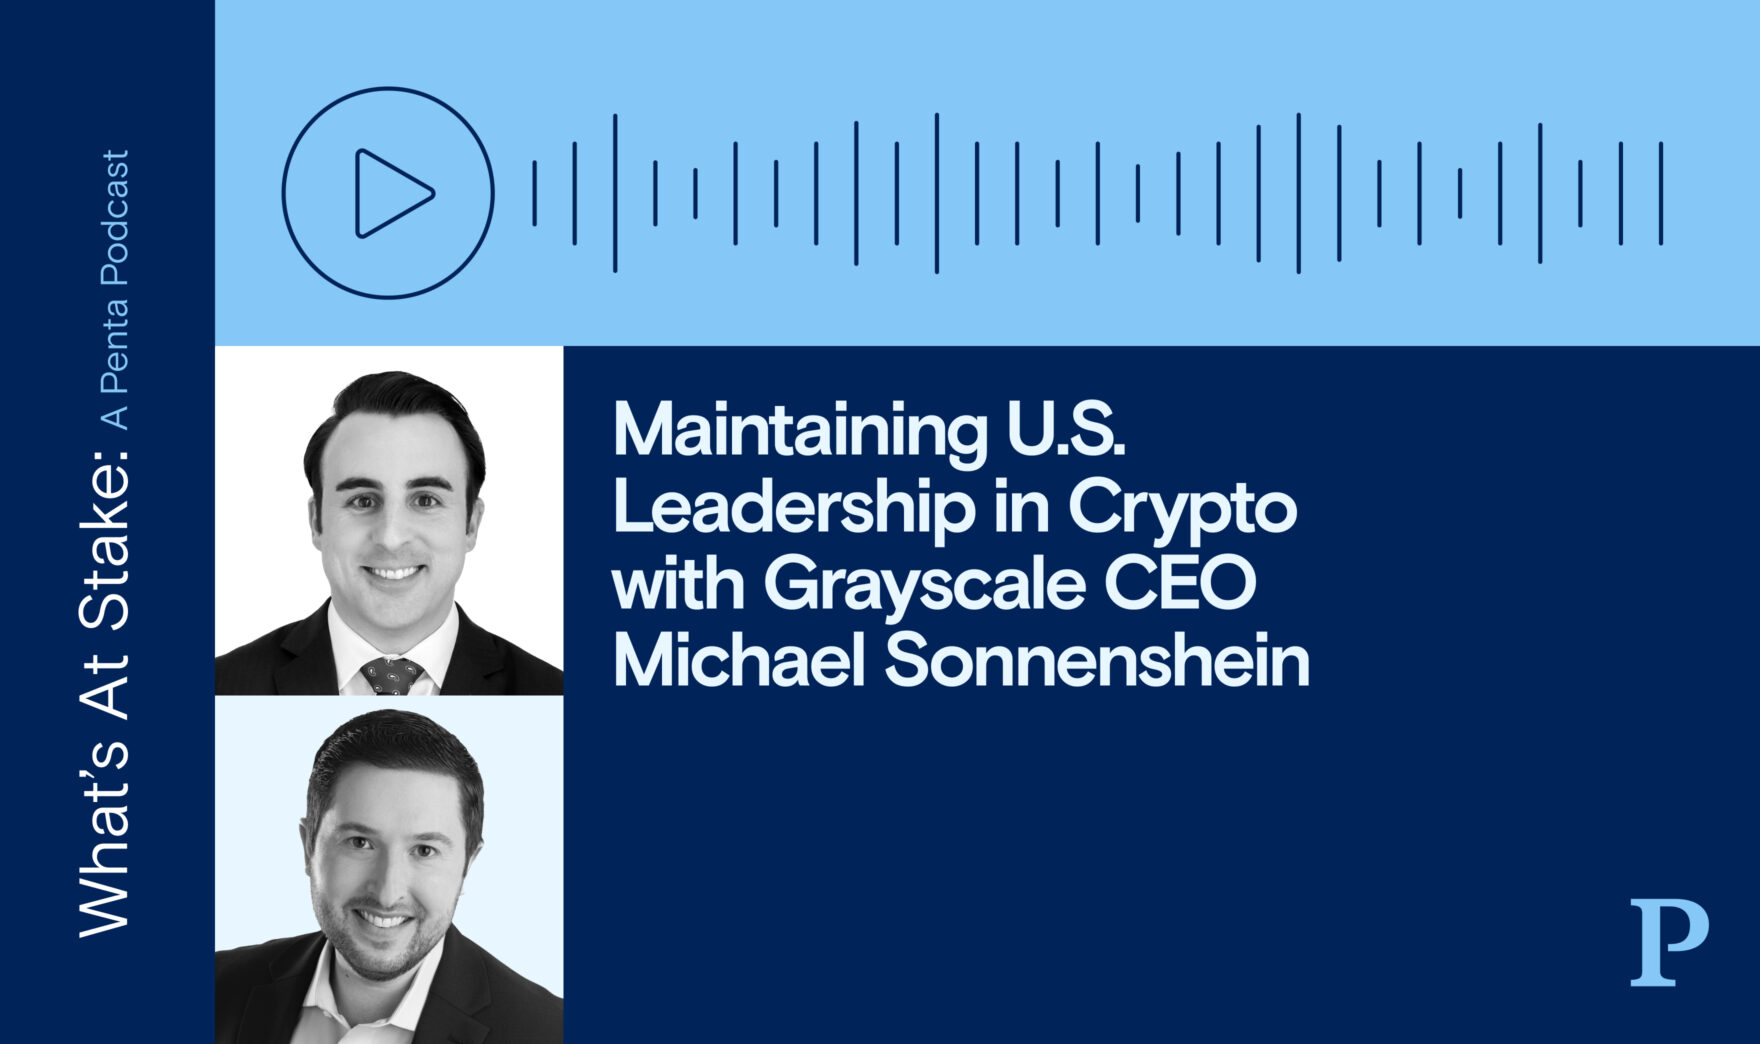 Maintaining U.S. Leadership in Crypto with Grayscale CEO Michael Sonnenshein